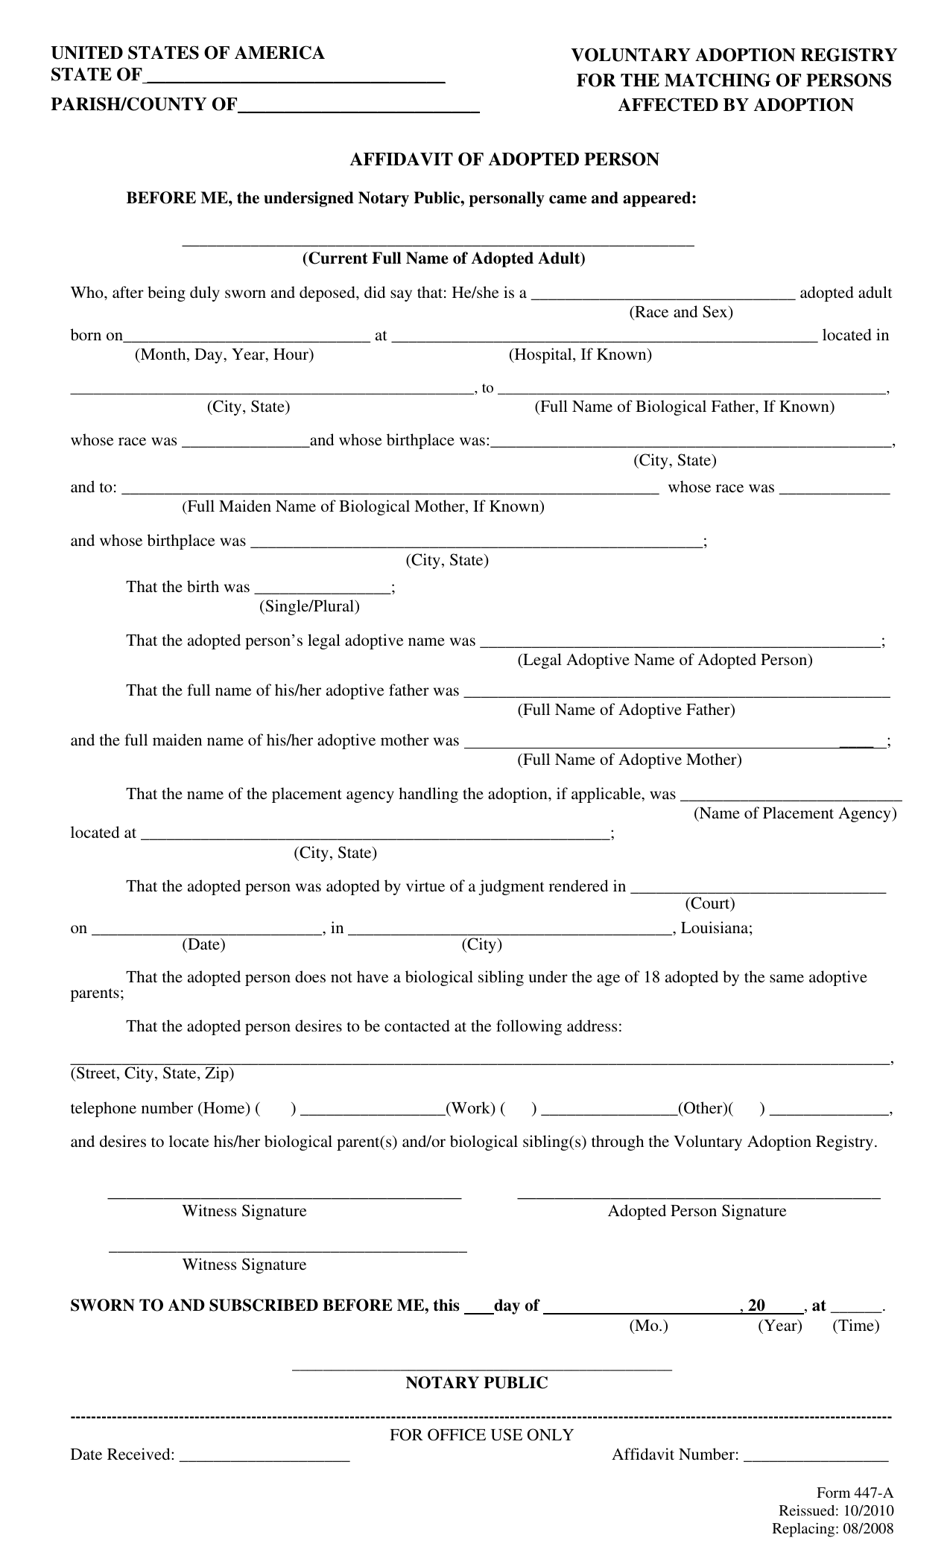 Form 447-A Affidavit of Adopted Person - Louisiana, Page 1